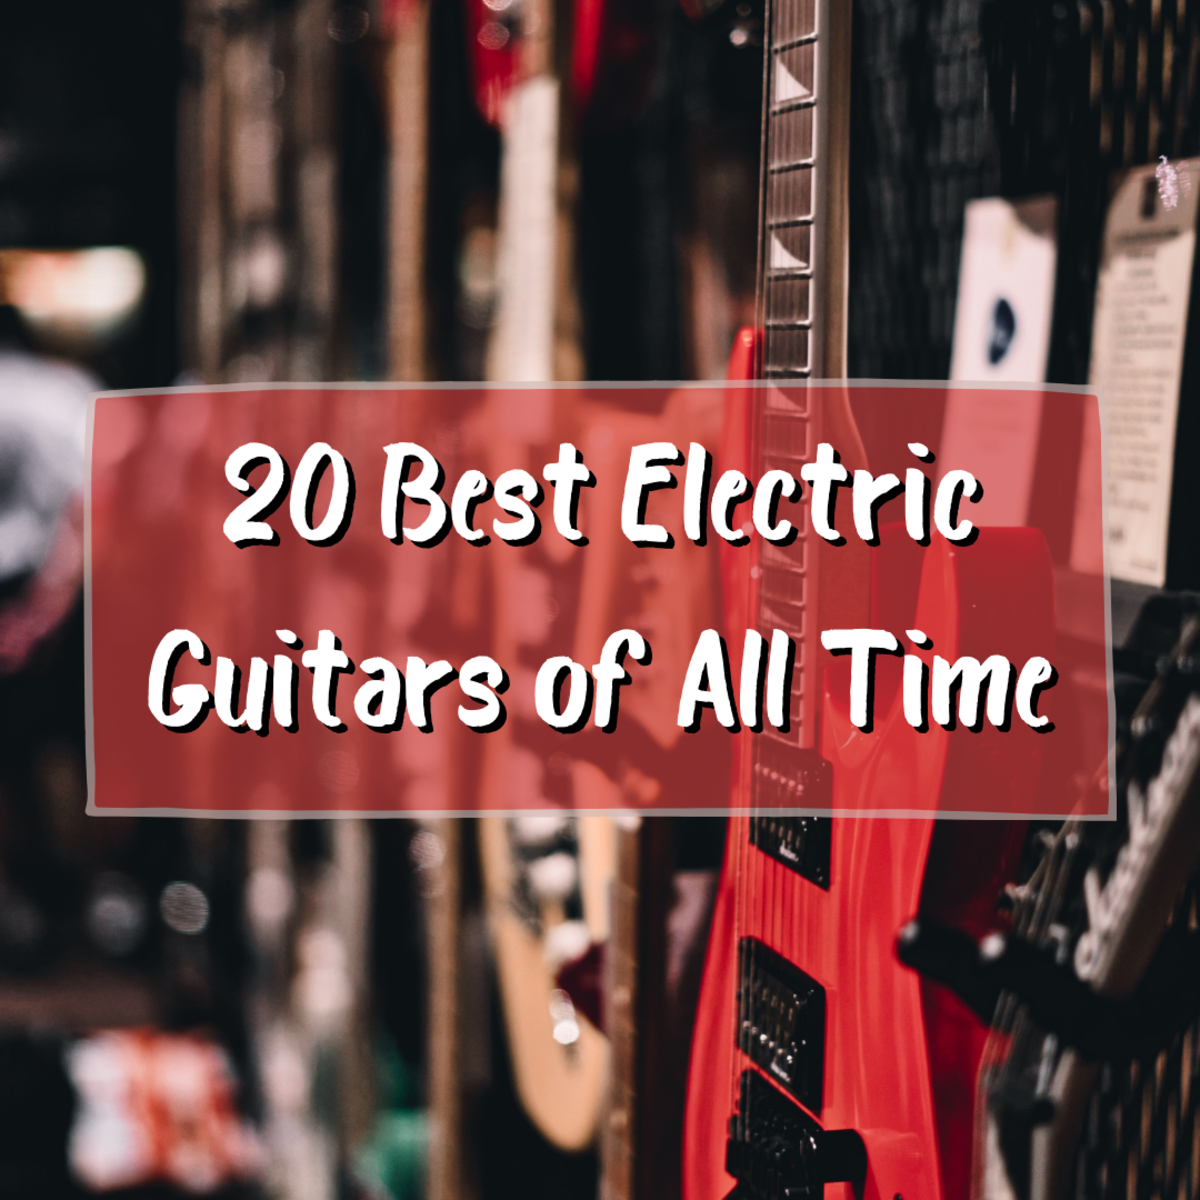 20 Best Electric Guitars of All Time